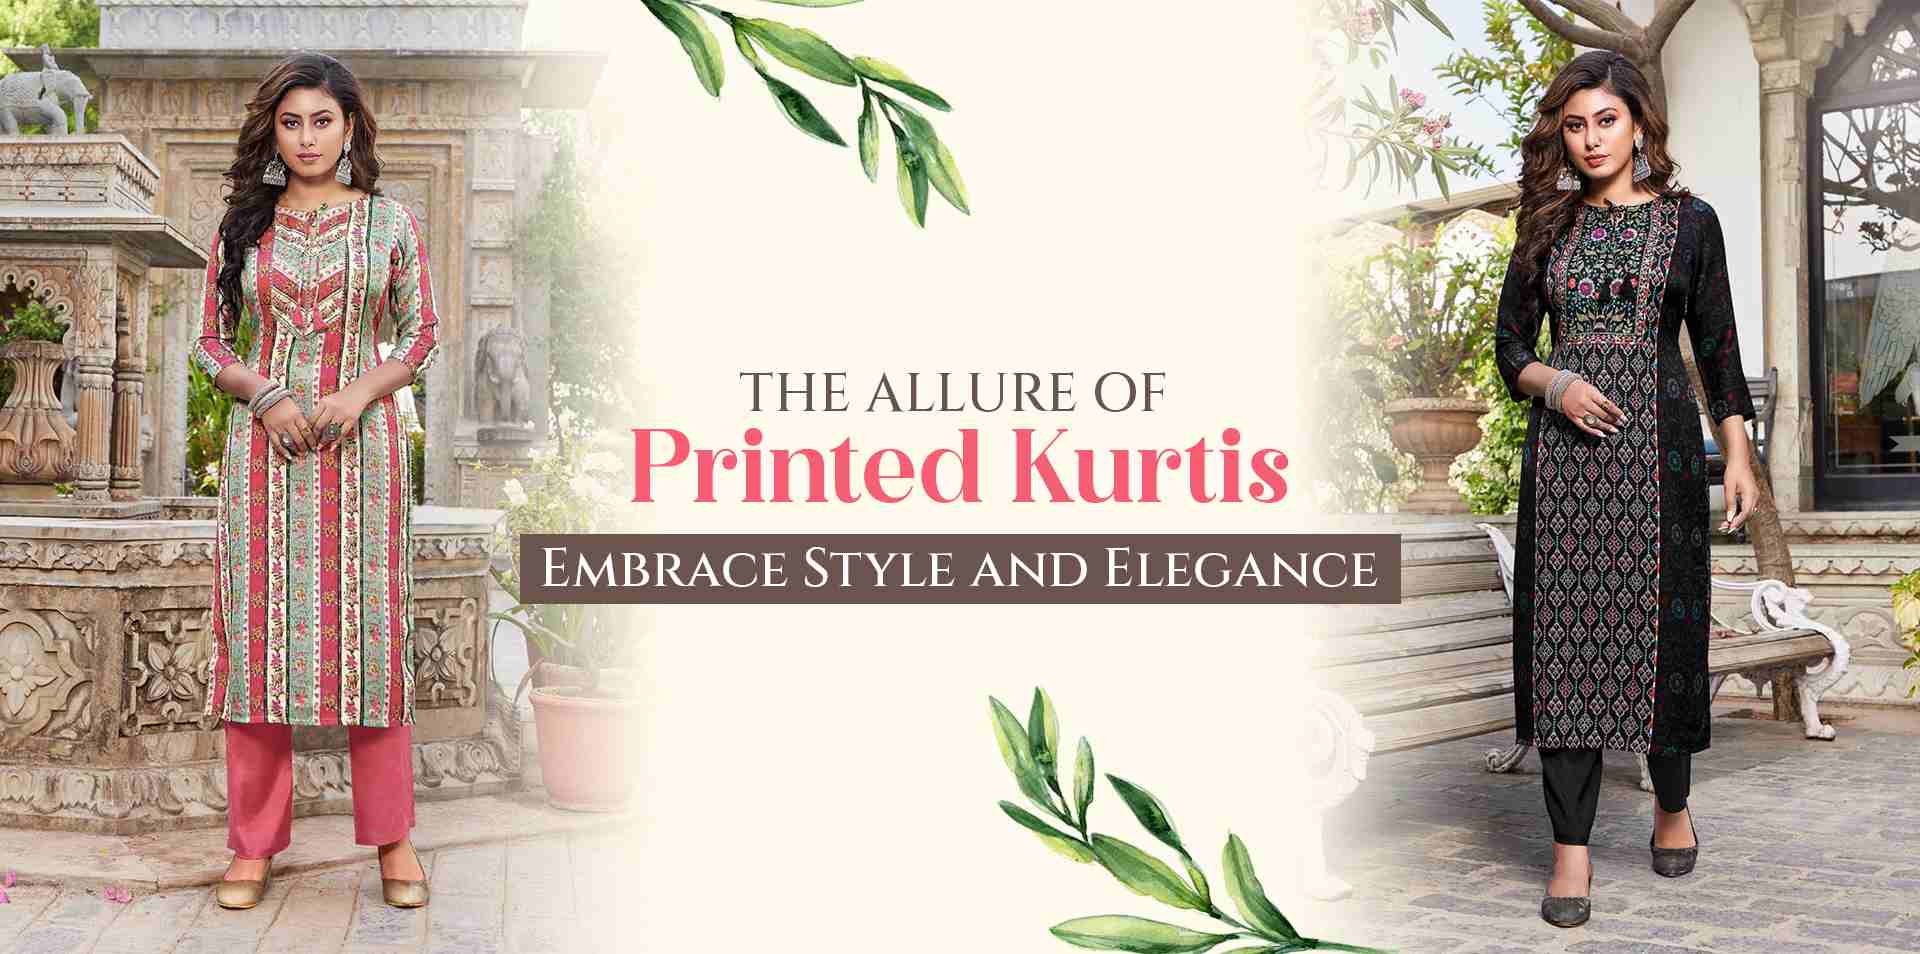 The Allure of Printed Kurtis: Embrace Style and Elegance